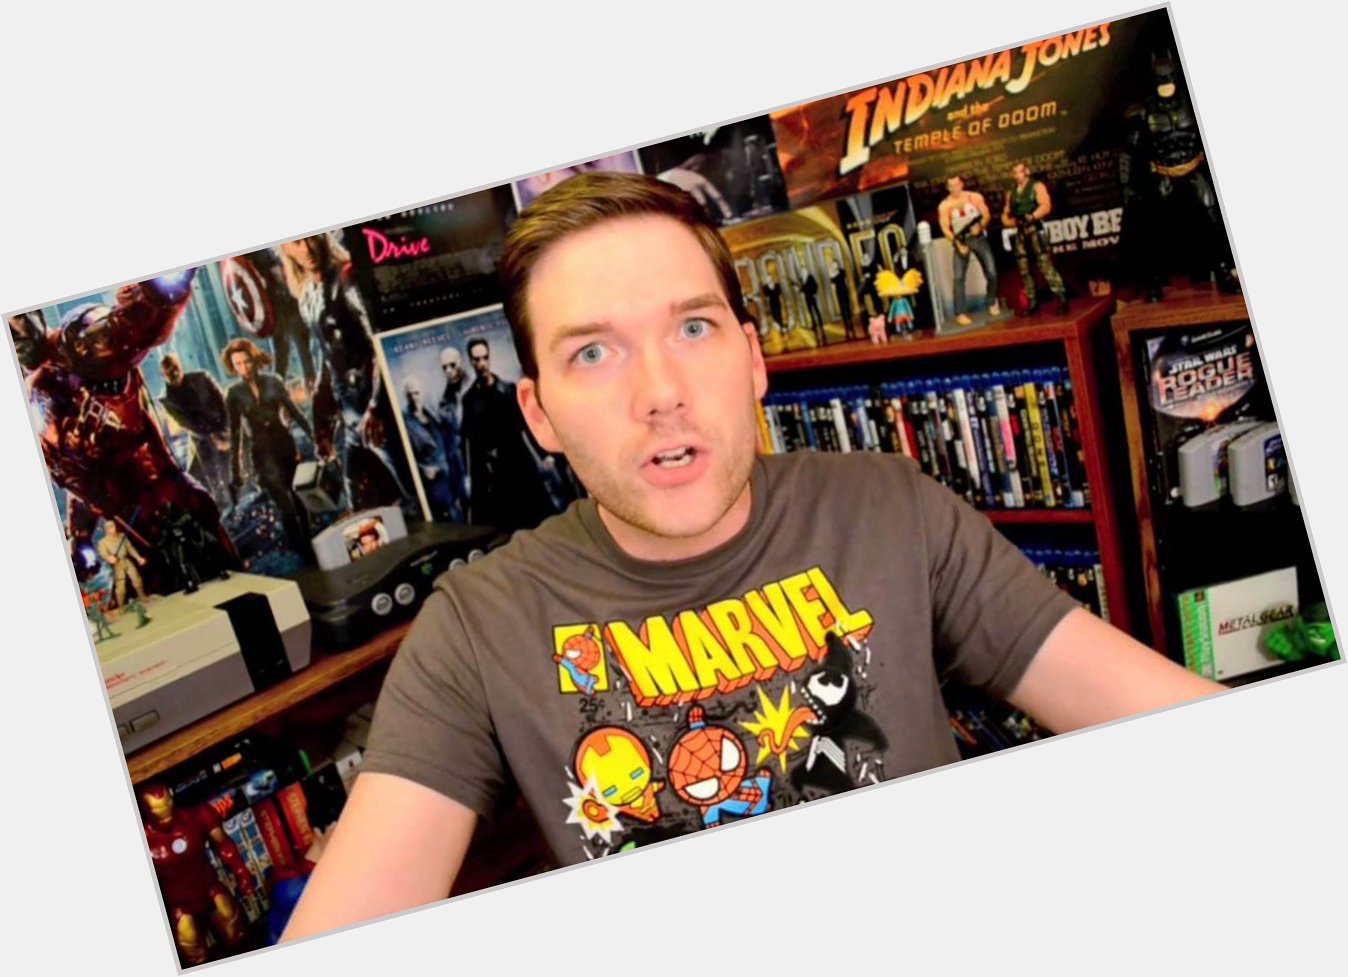 Happy 30th Birthday to Chris Stuckmann! The YouTuber who reviews movies new and old. 